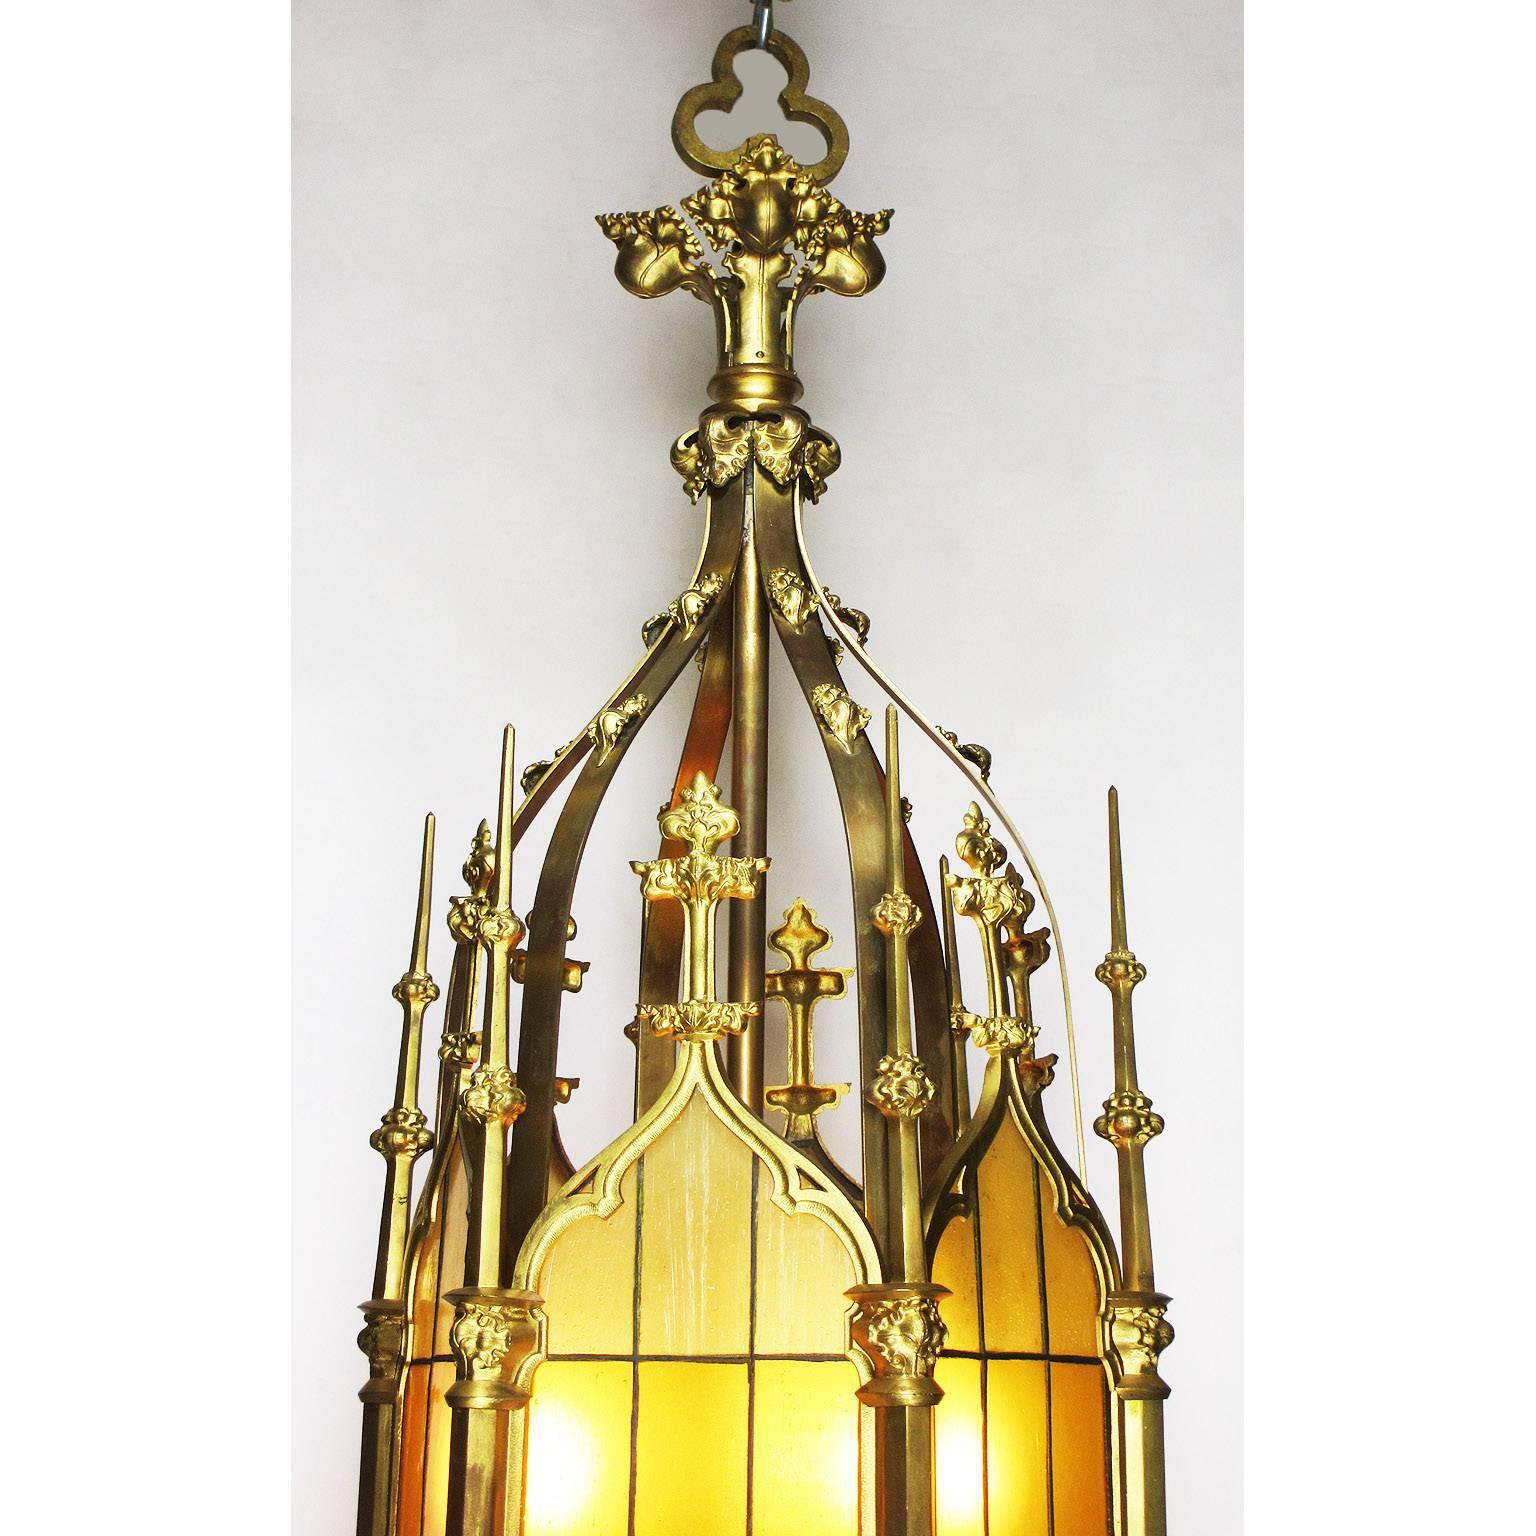 A very fine and large set of four French 19th-20th century Gothic Revival style gilt bronze and glass six-light hanging lanterns with opaque-yellow stained-art glass, the top crowned with a cluster of fruits, circa 1900.

Note: These are a set of